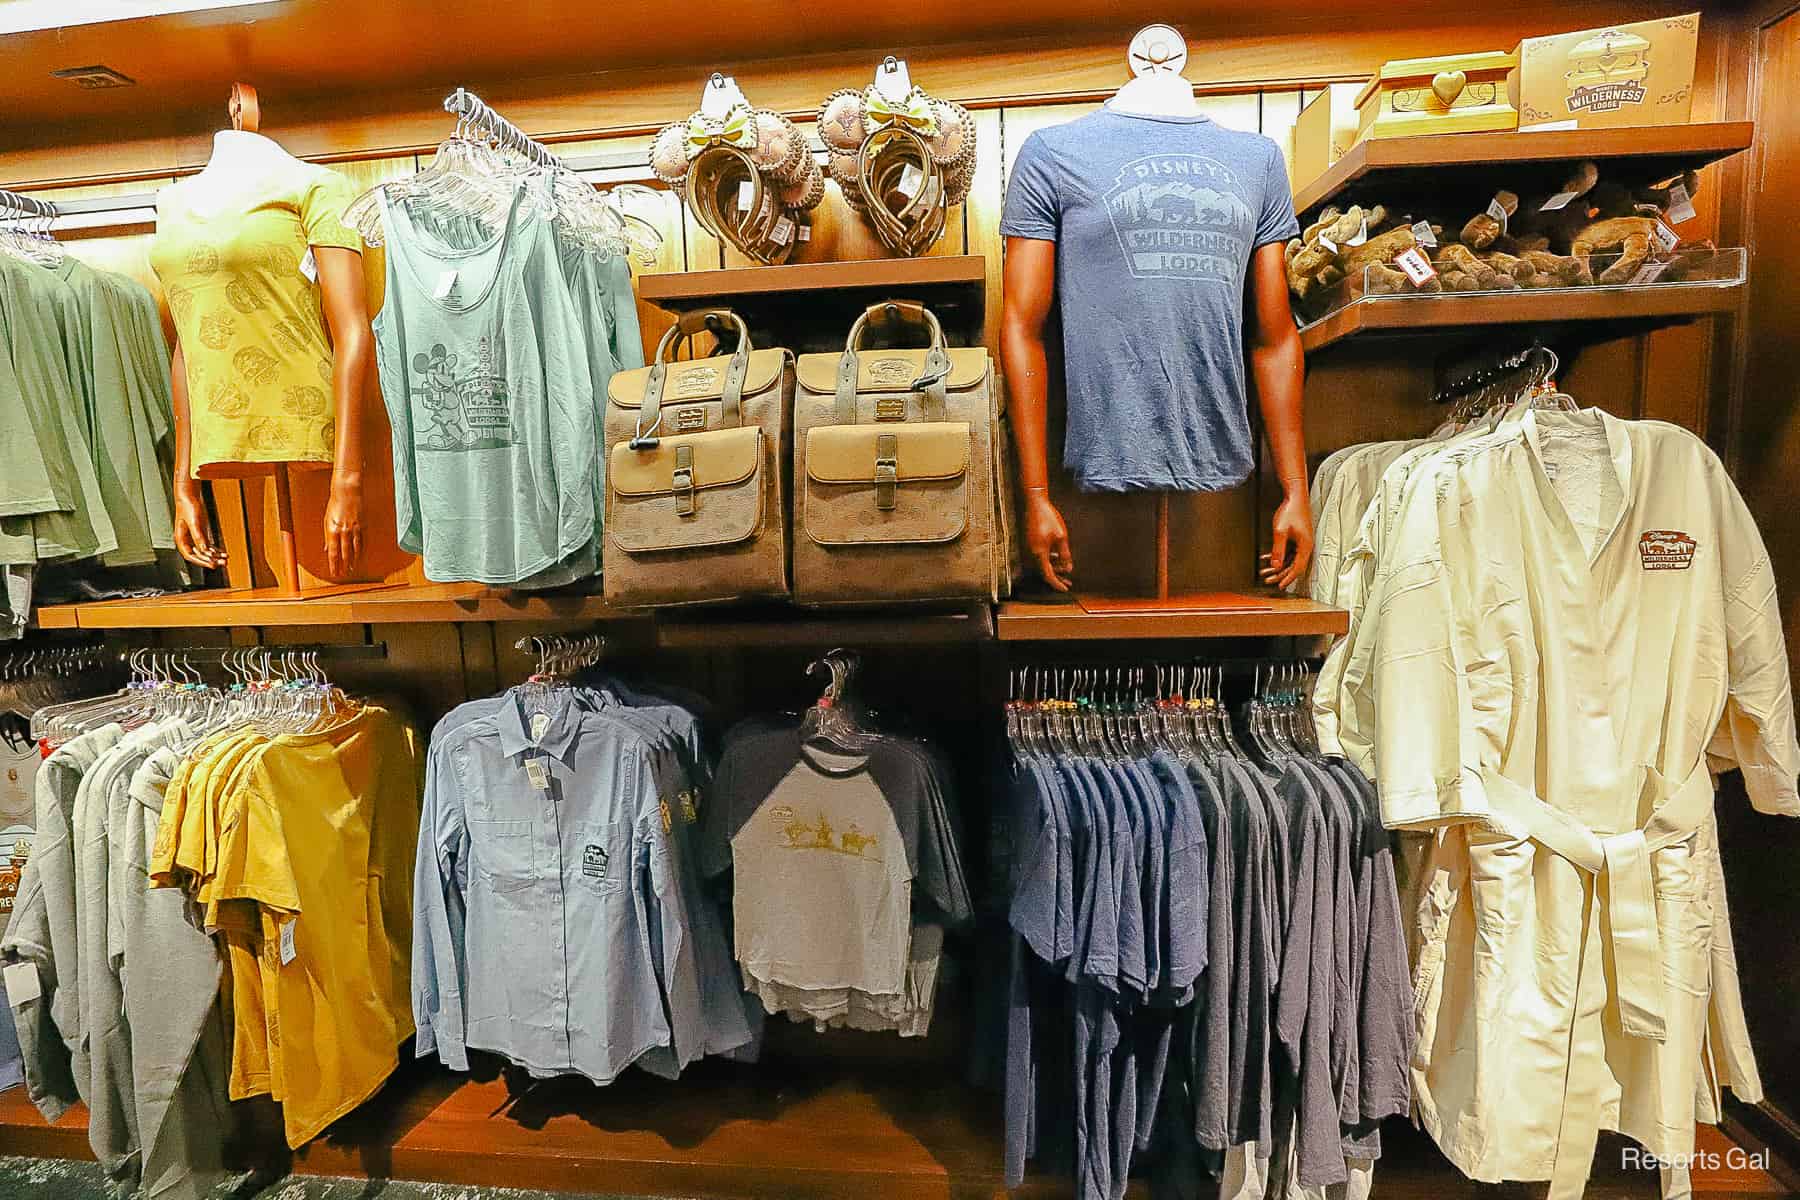 resort-branded merchandise at the Wilderness Lodge gift shop